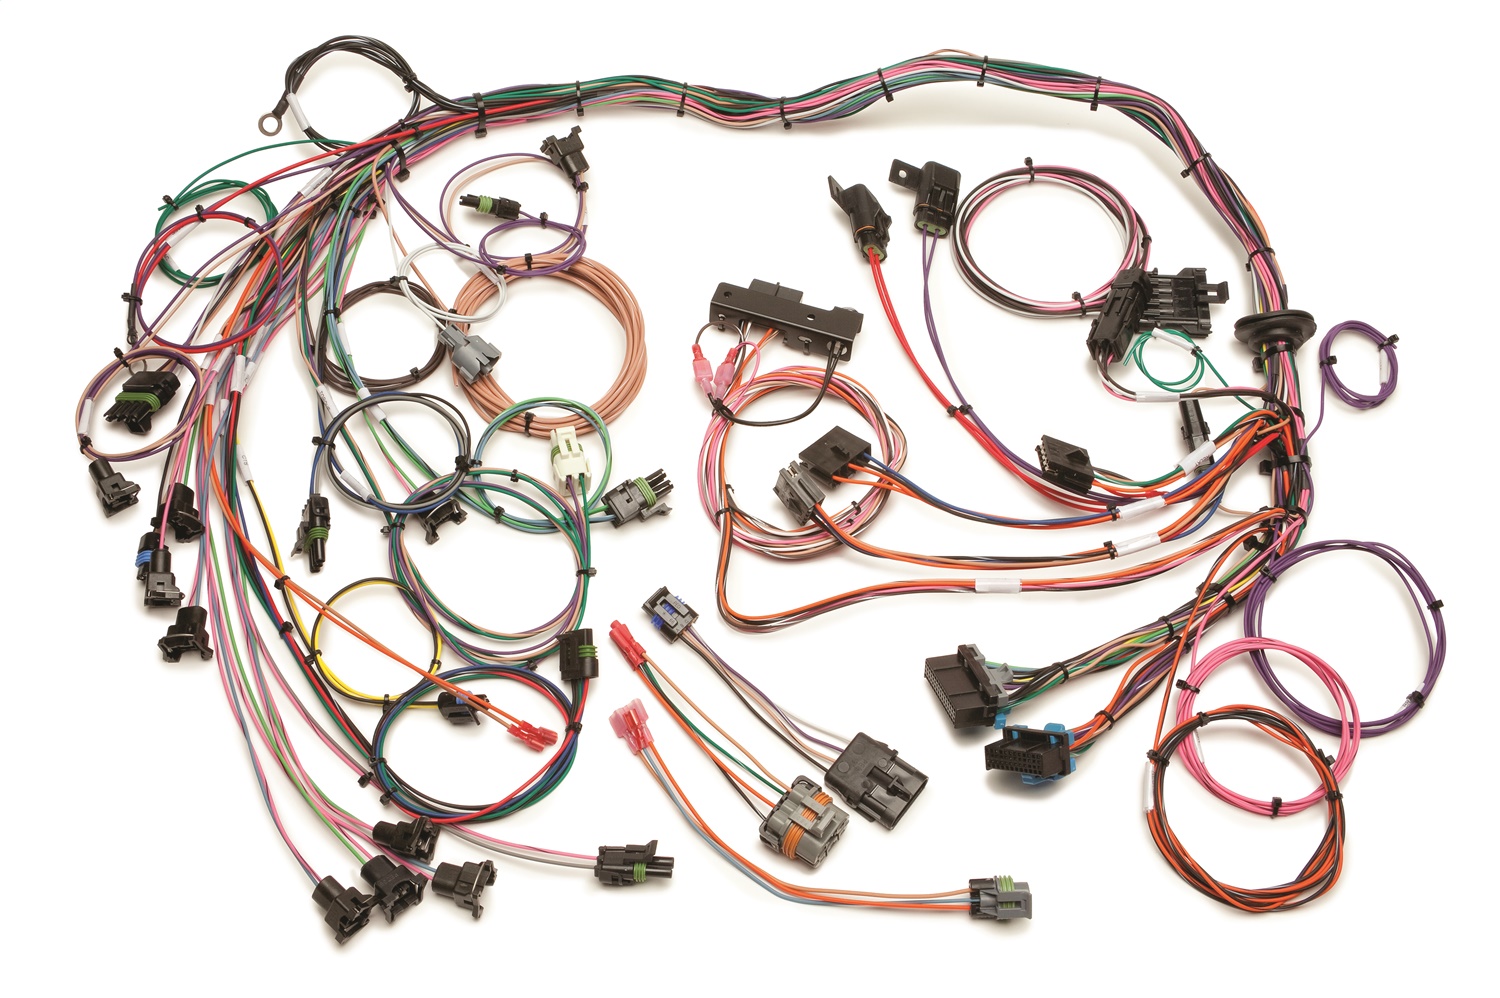 Painless Wiring Painless Wiring 60102 GM TPI Fuel Injection Harness Fits 85-89 Camaro Corvette